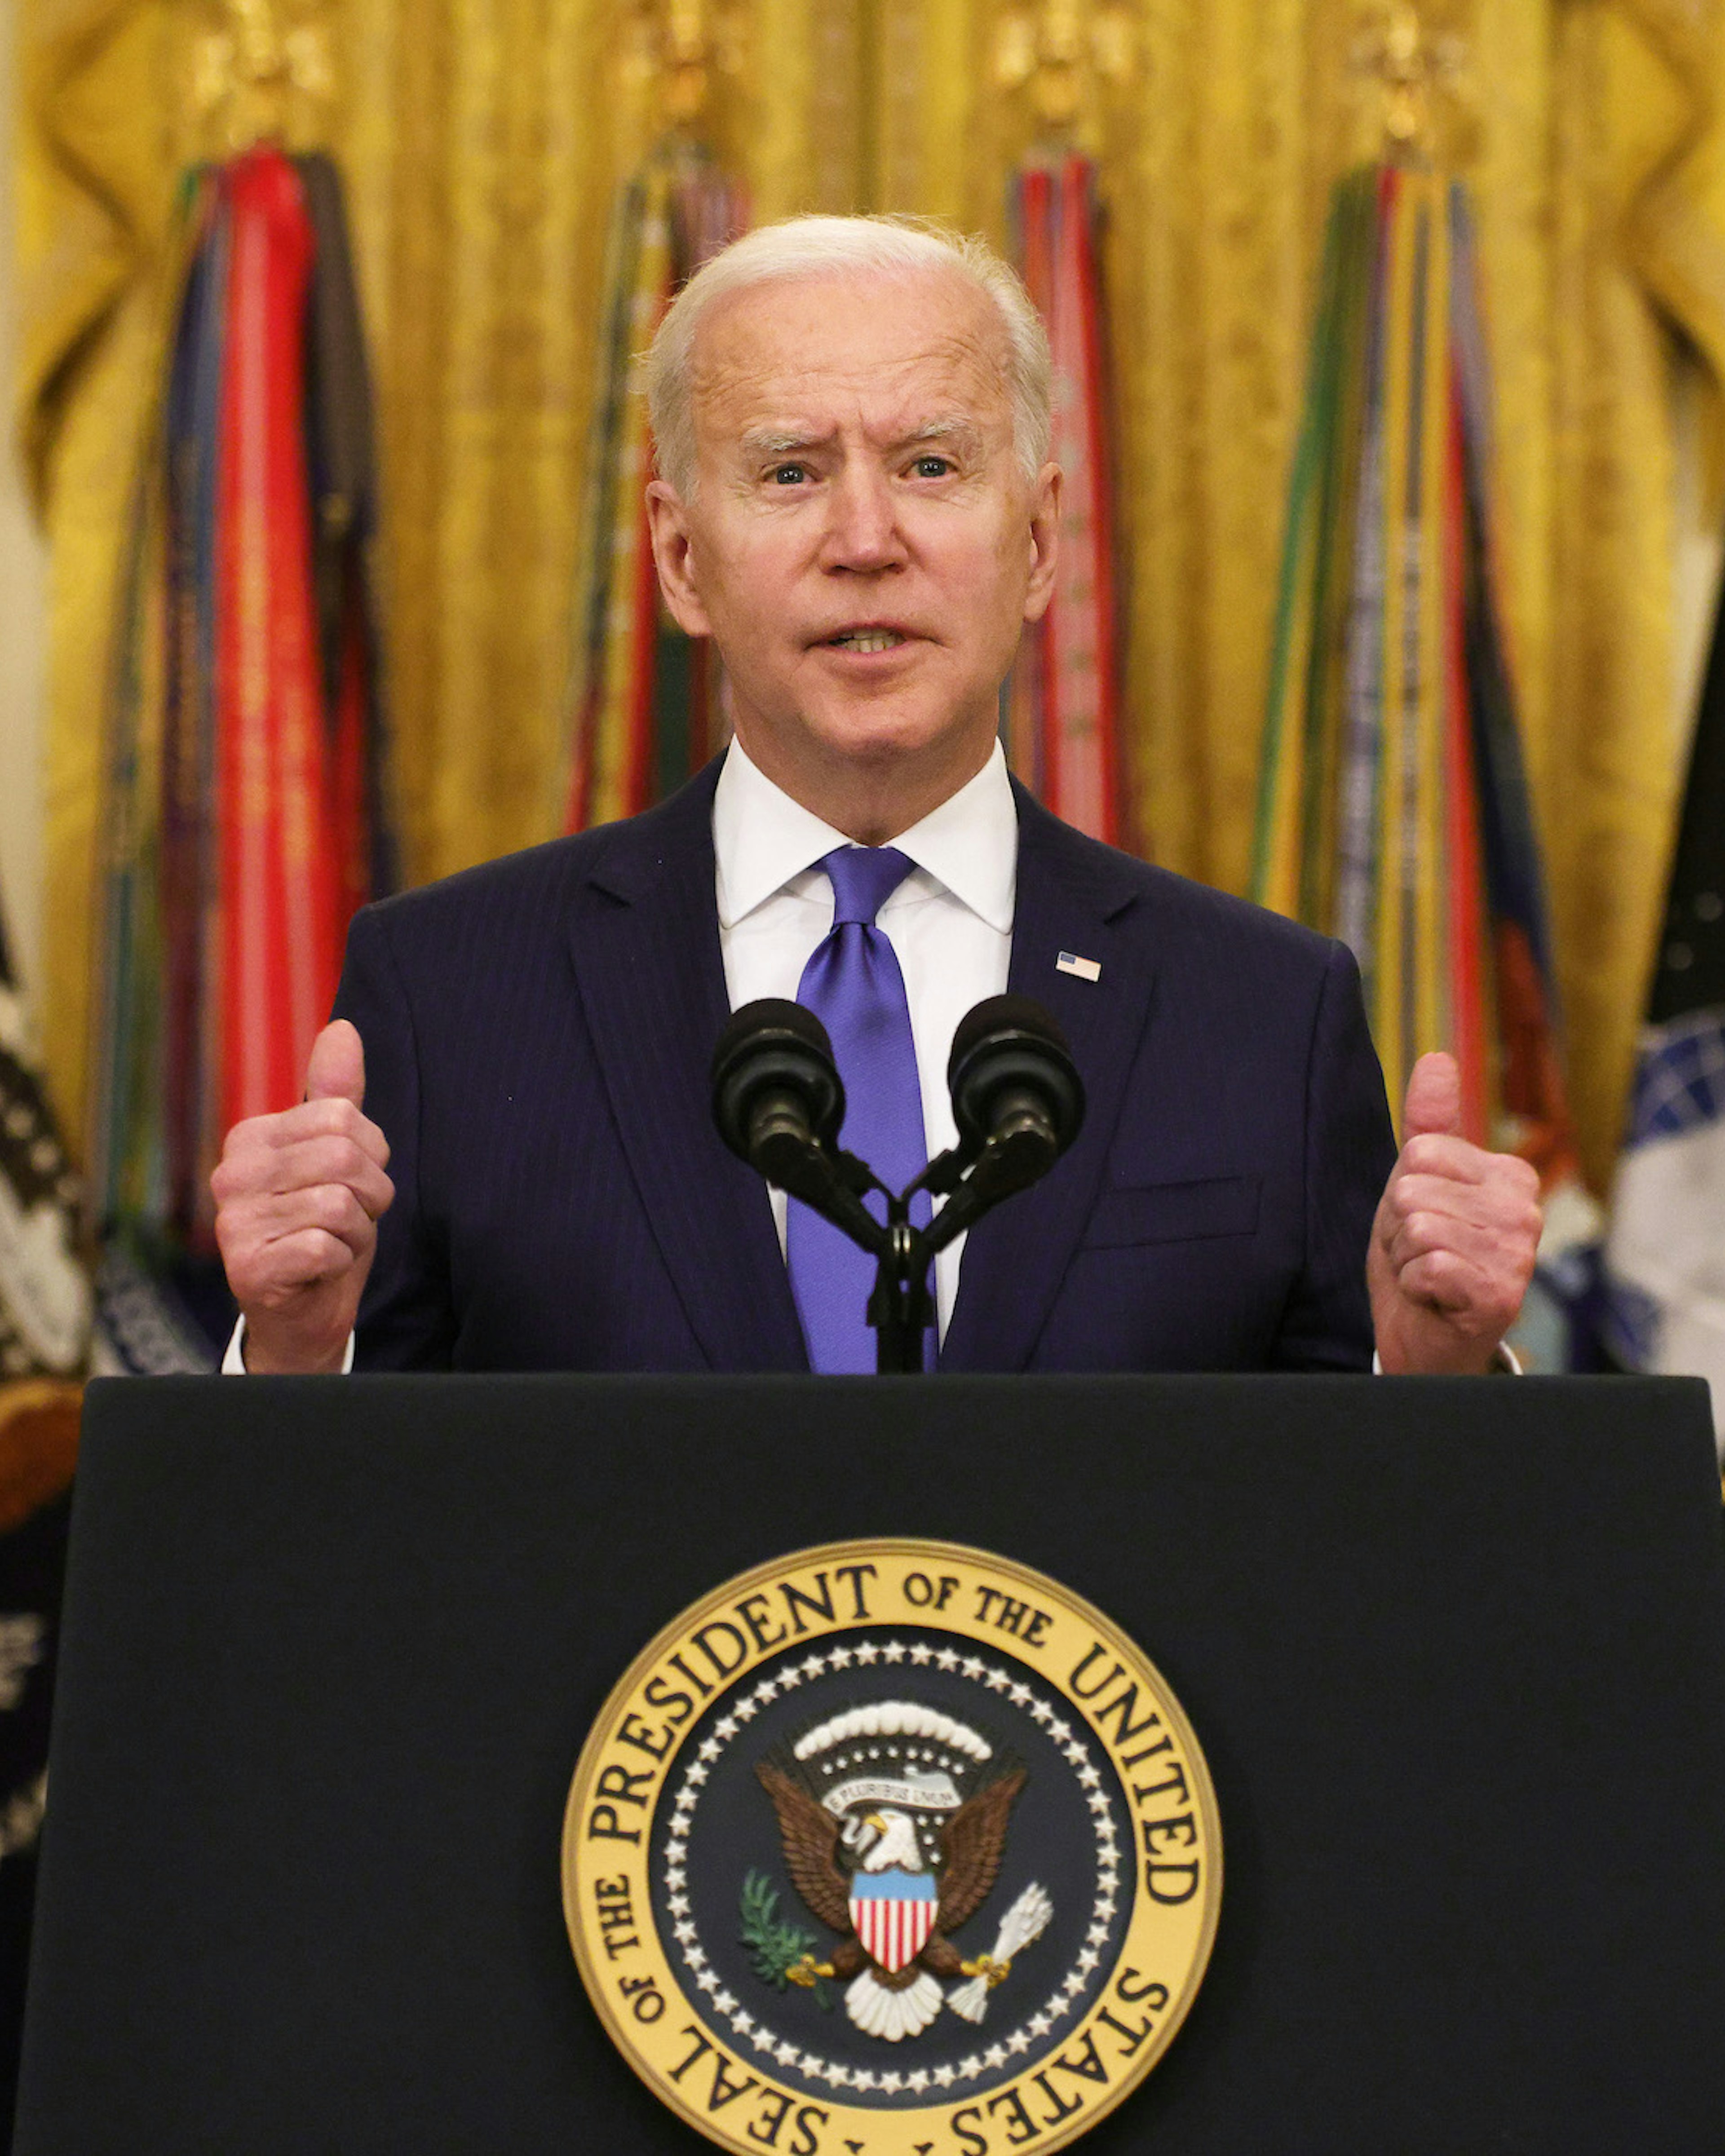 U.S. President Joe Biden delivers remarks on International Women’s Day as Air Force General Jacqueline Van Ovost (L) and Army Lieutenant General Laura Richardson (R) listen during an announcement at the East Room of the White House March 8, 2021 in Washington, DC. President Biden announced the nominations of General Van Ovost and Lieutenant General Richardson to positions as 4-star combatant commanders. They will become the second and the third women to lead a combatant command in American history. (Photo by Alex Wong/Getty Images)